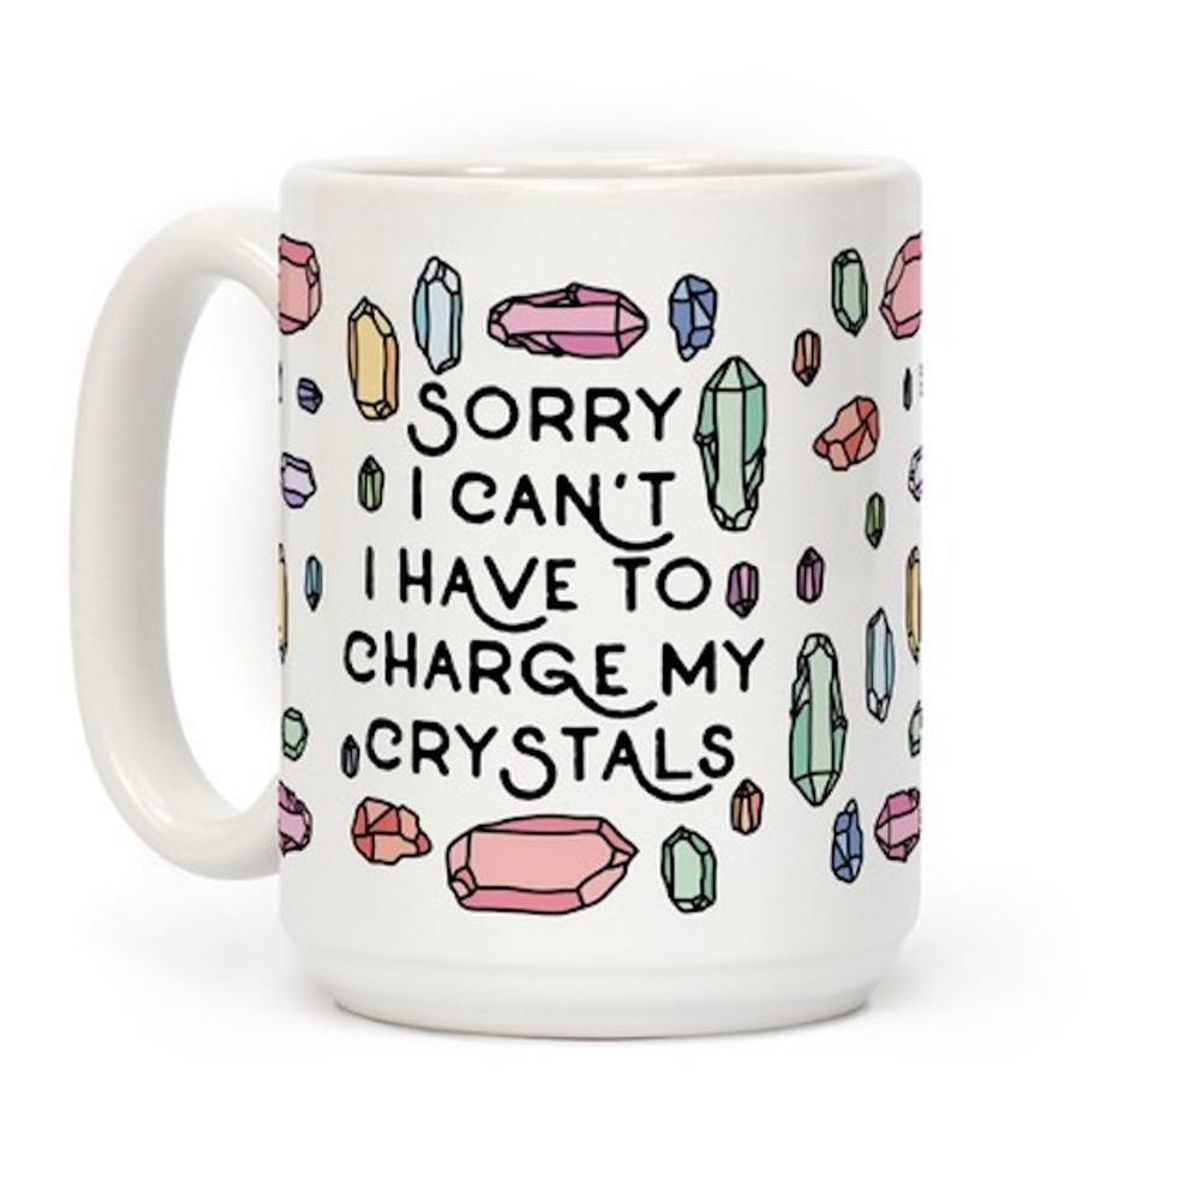 12 Gifts for People Who Can’t Get Enough Crystals in Their Life